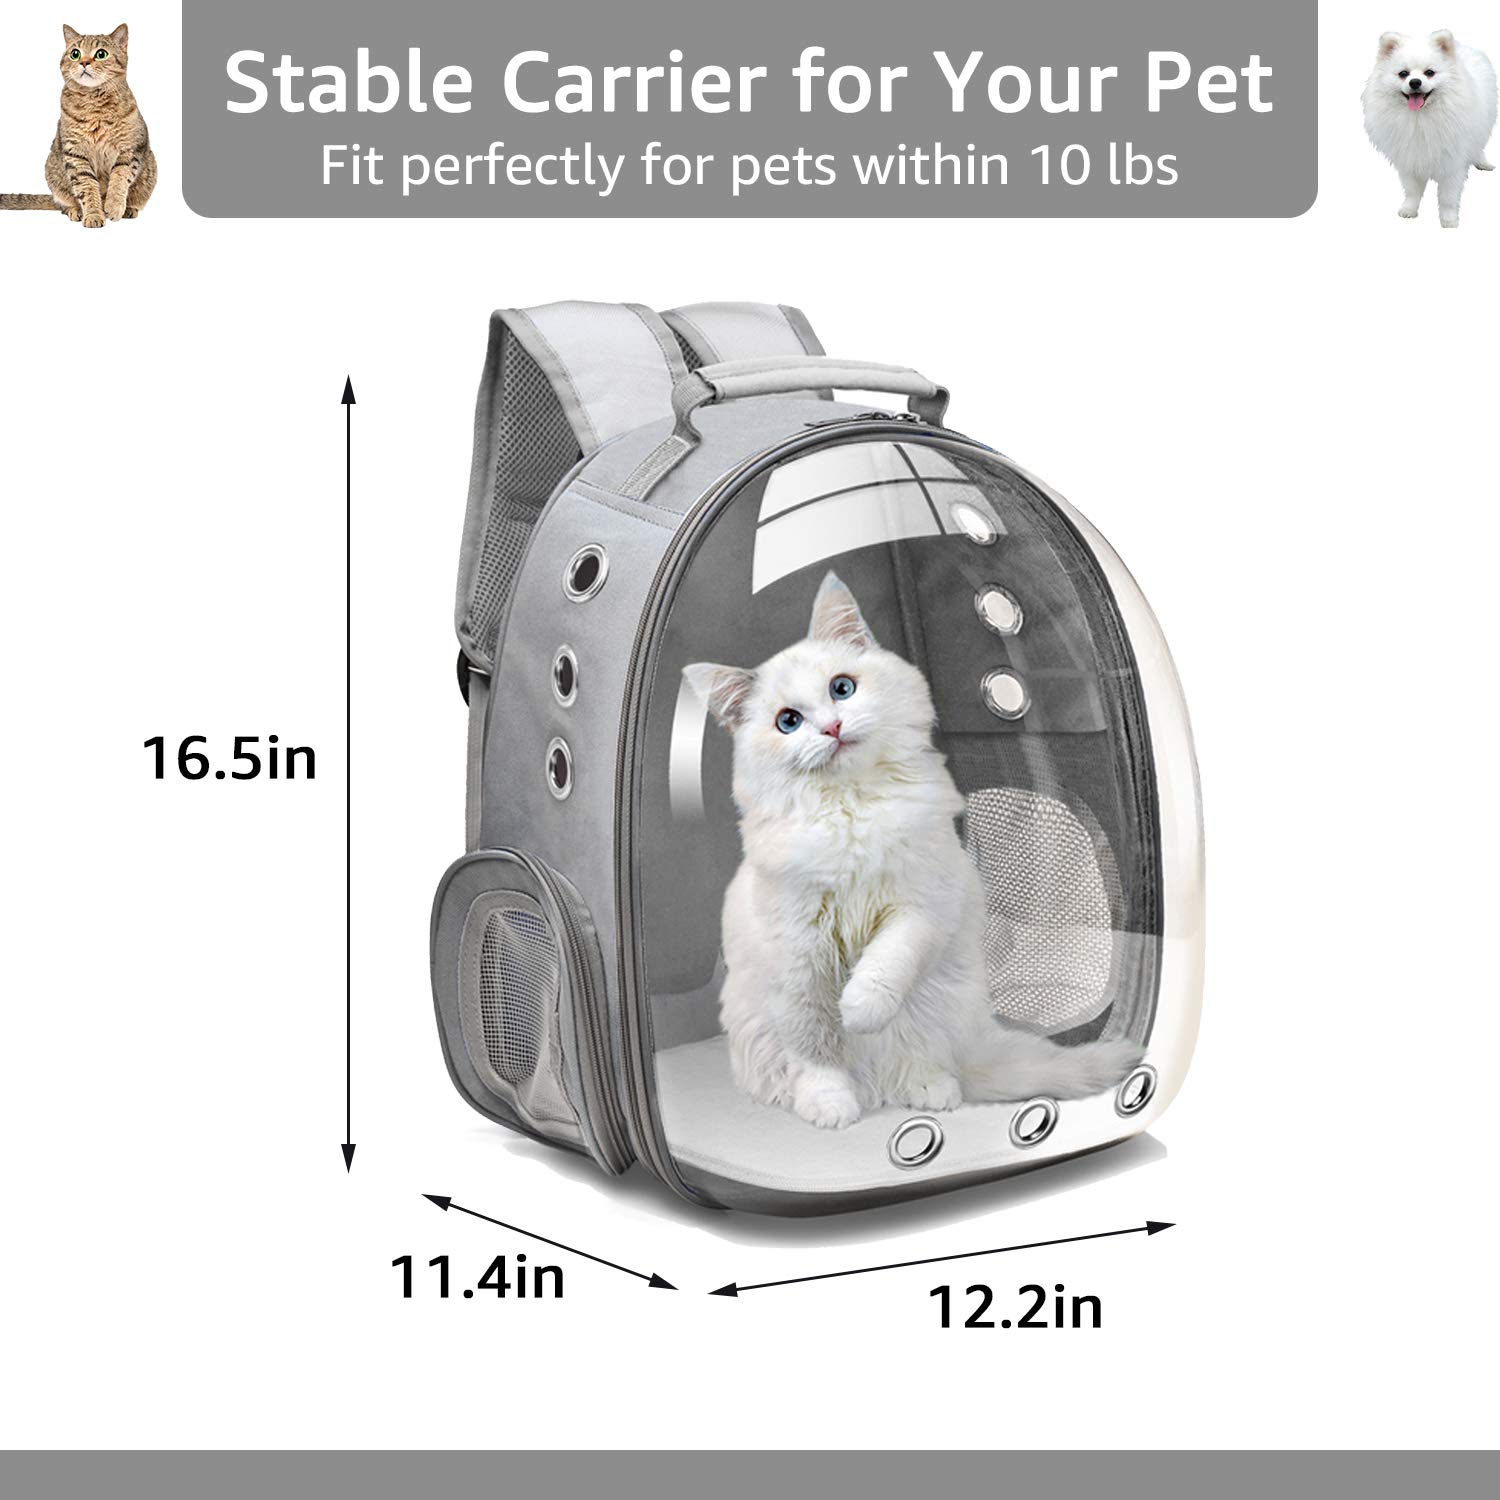 Henkelion Bubble Carrying Bag for Small Medium dogs Cats, Space Capsule Pet Hiking backpack, Airline Approved Travel carrier - Grey